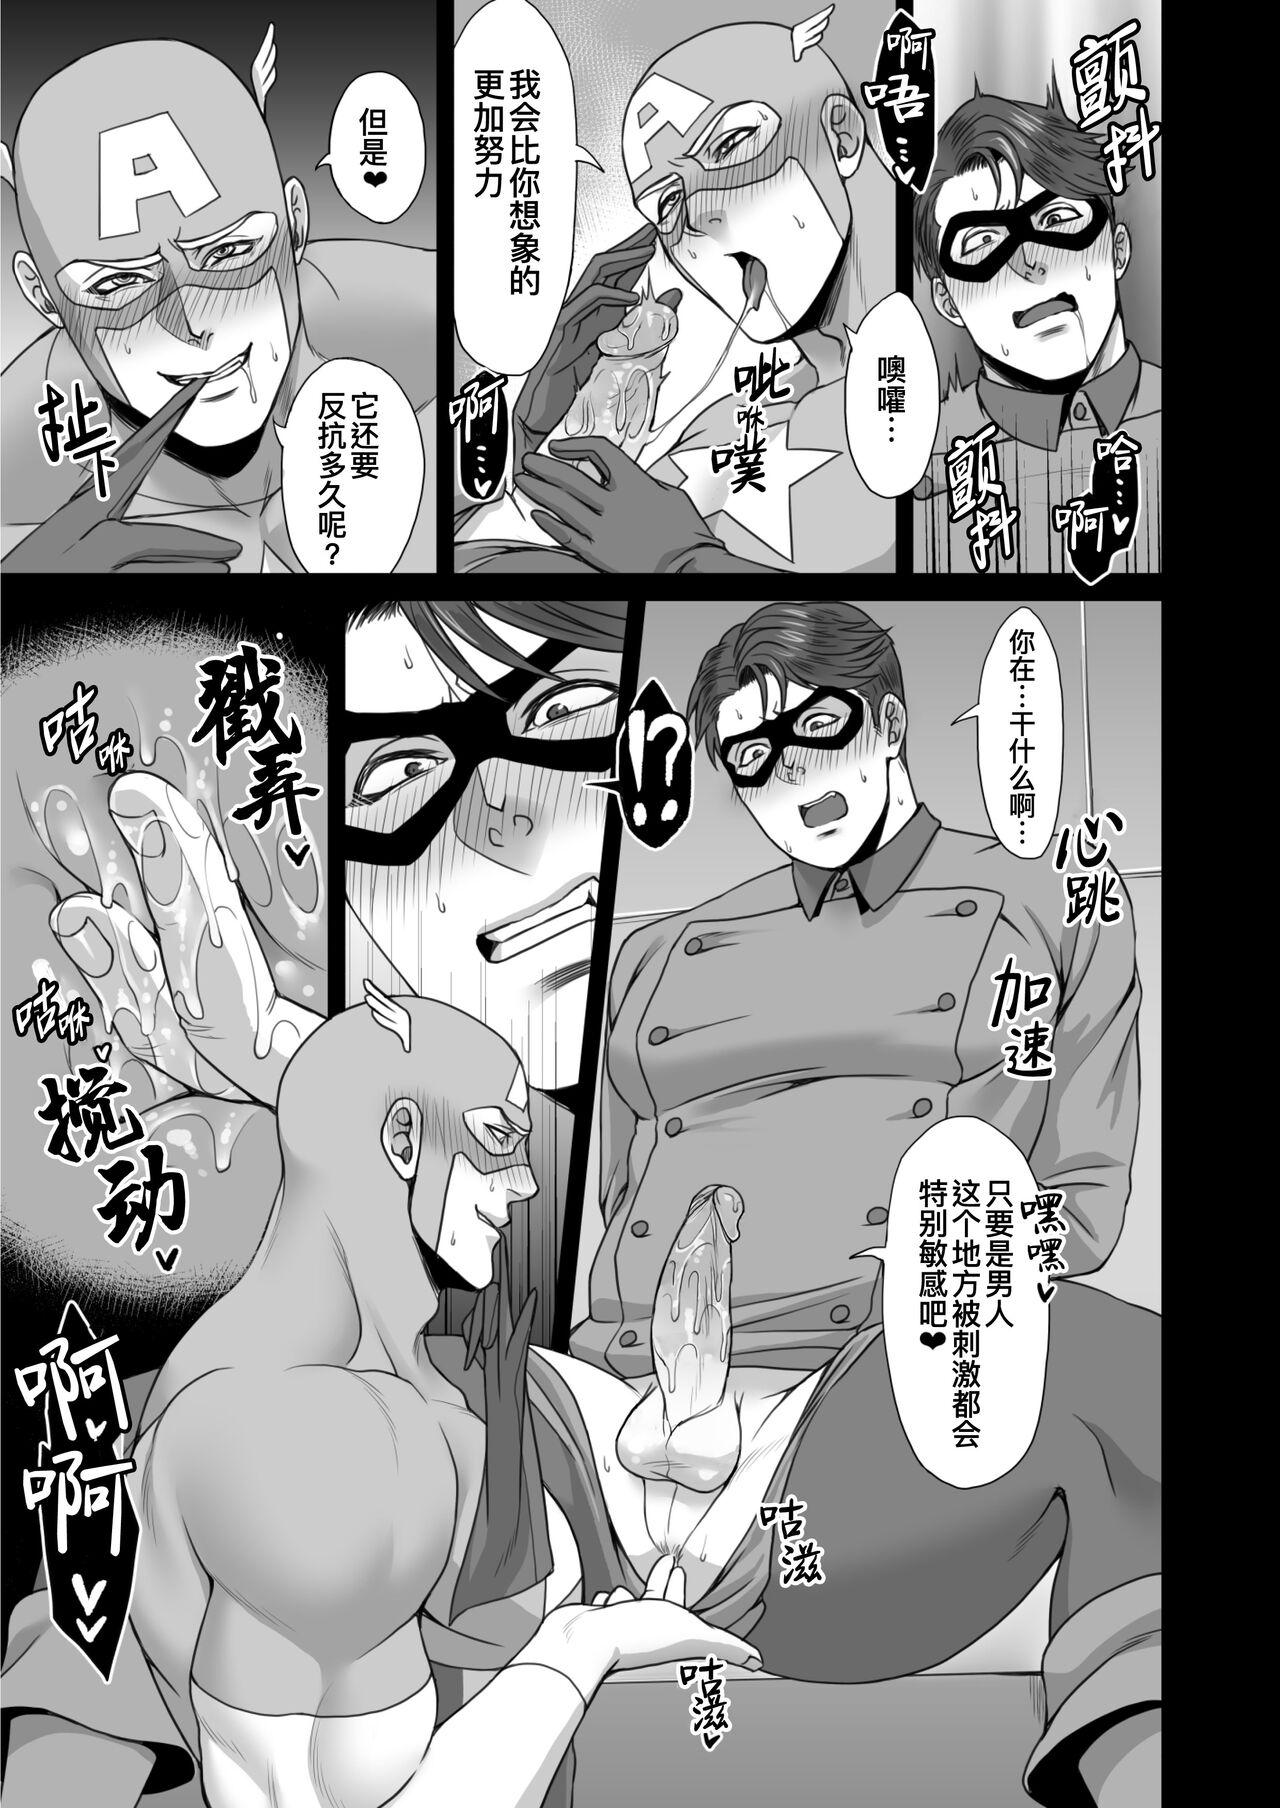 American NO HEROES Our love and hate relationship | 不再需要英雄 - 关于我们之间的爱恨情仇 - Avengers Fake Tits - Page 11